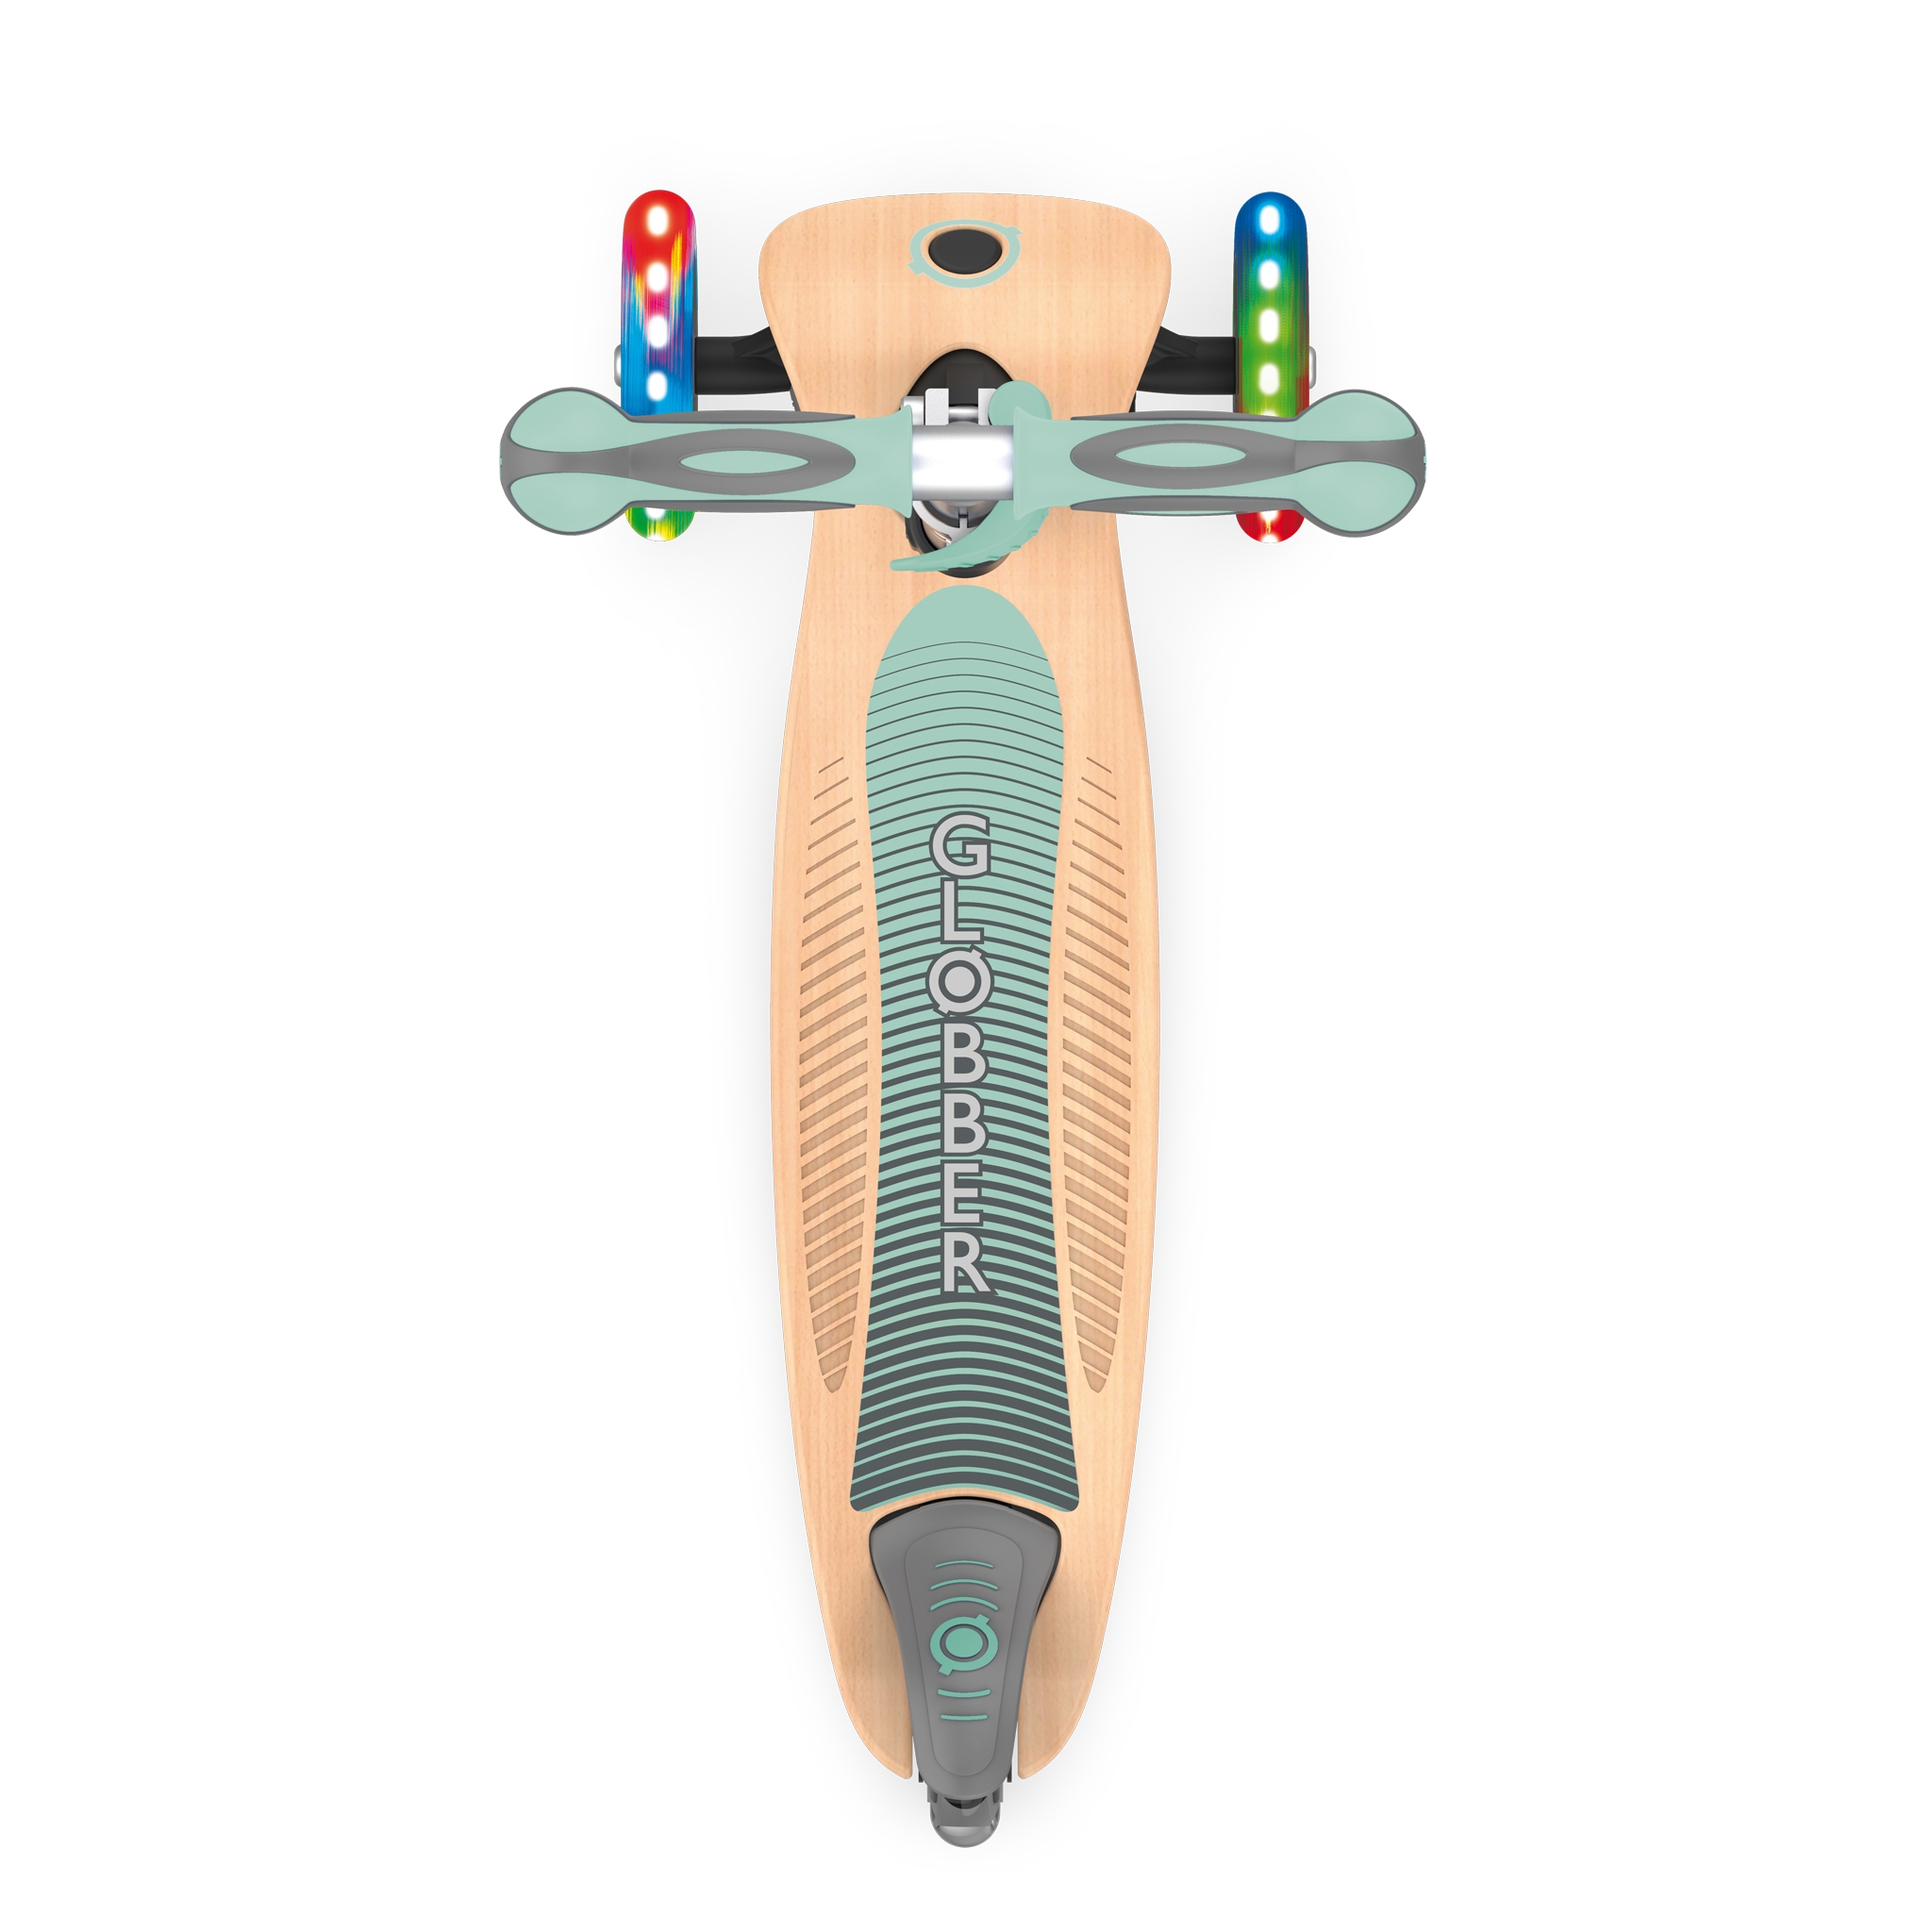 PRIMO-FOLDABLE-WOOD-LIGHTS-3-wheel-with-7-ply-wooden-scooter-deck-and-laser-engraved-sides-on-the-deck_pastel-green 3